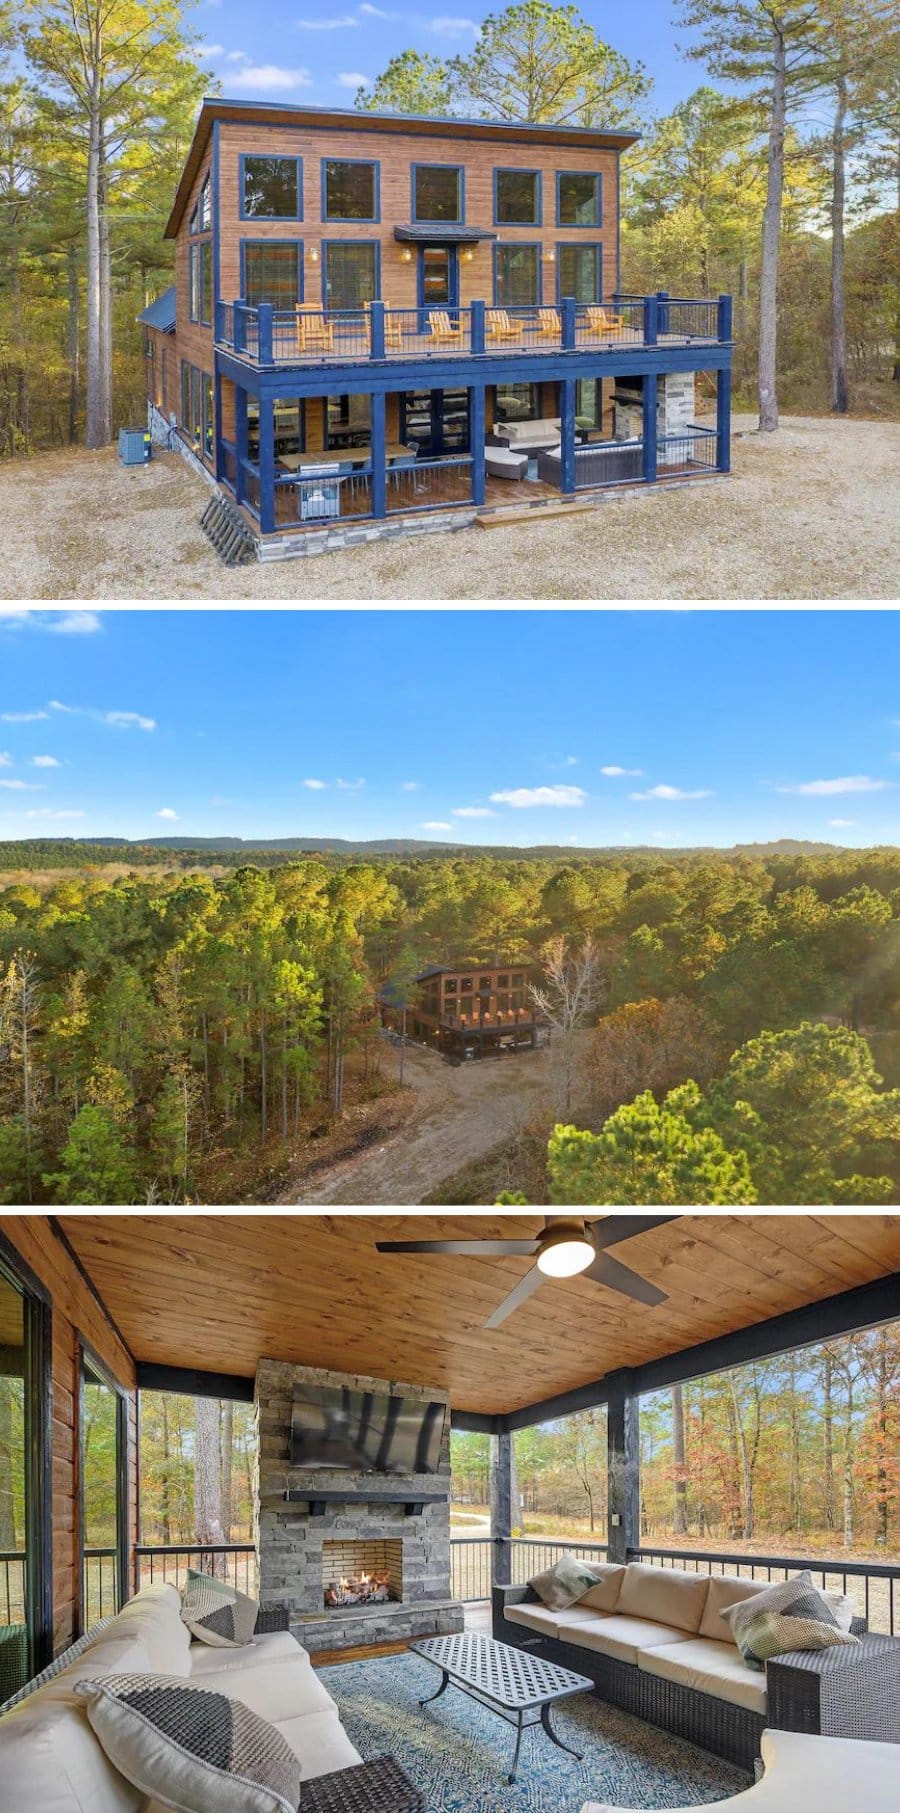 Interior and exterior images of the StarFire Cabin in Broken Bow, Oklahoma